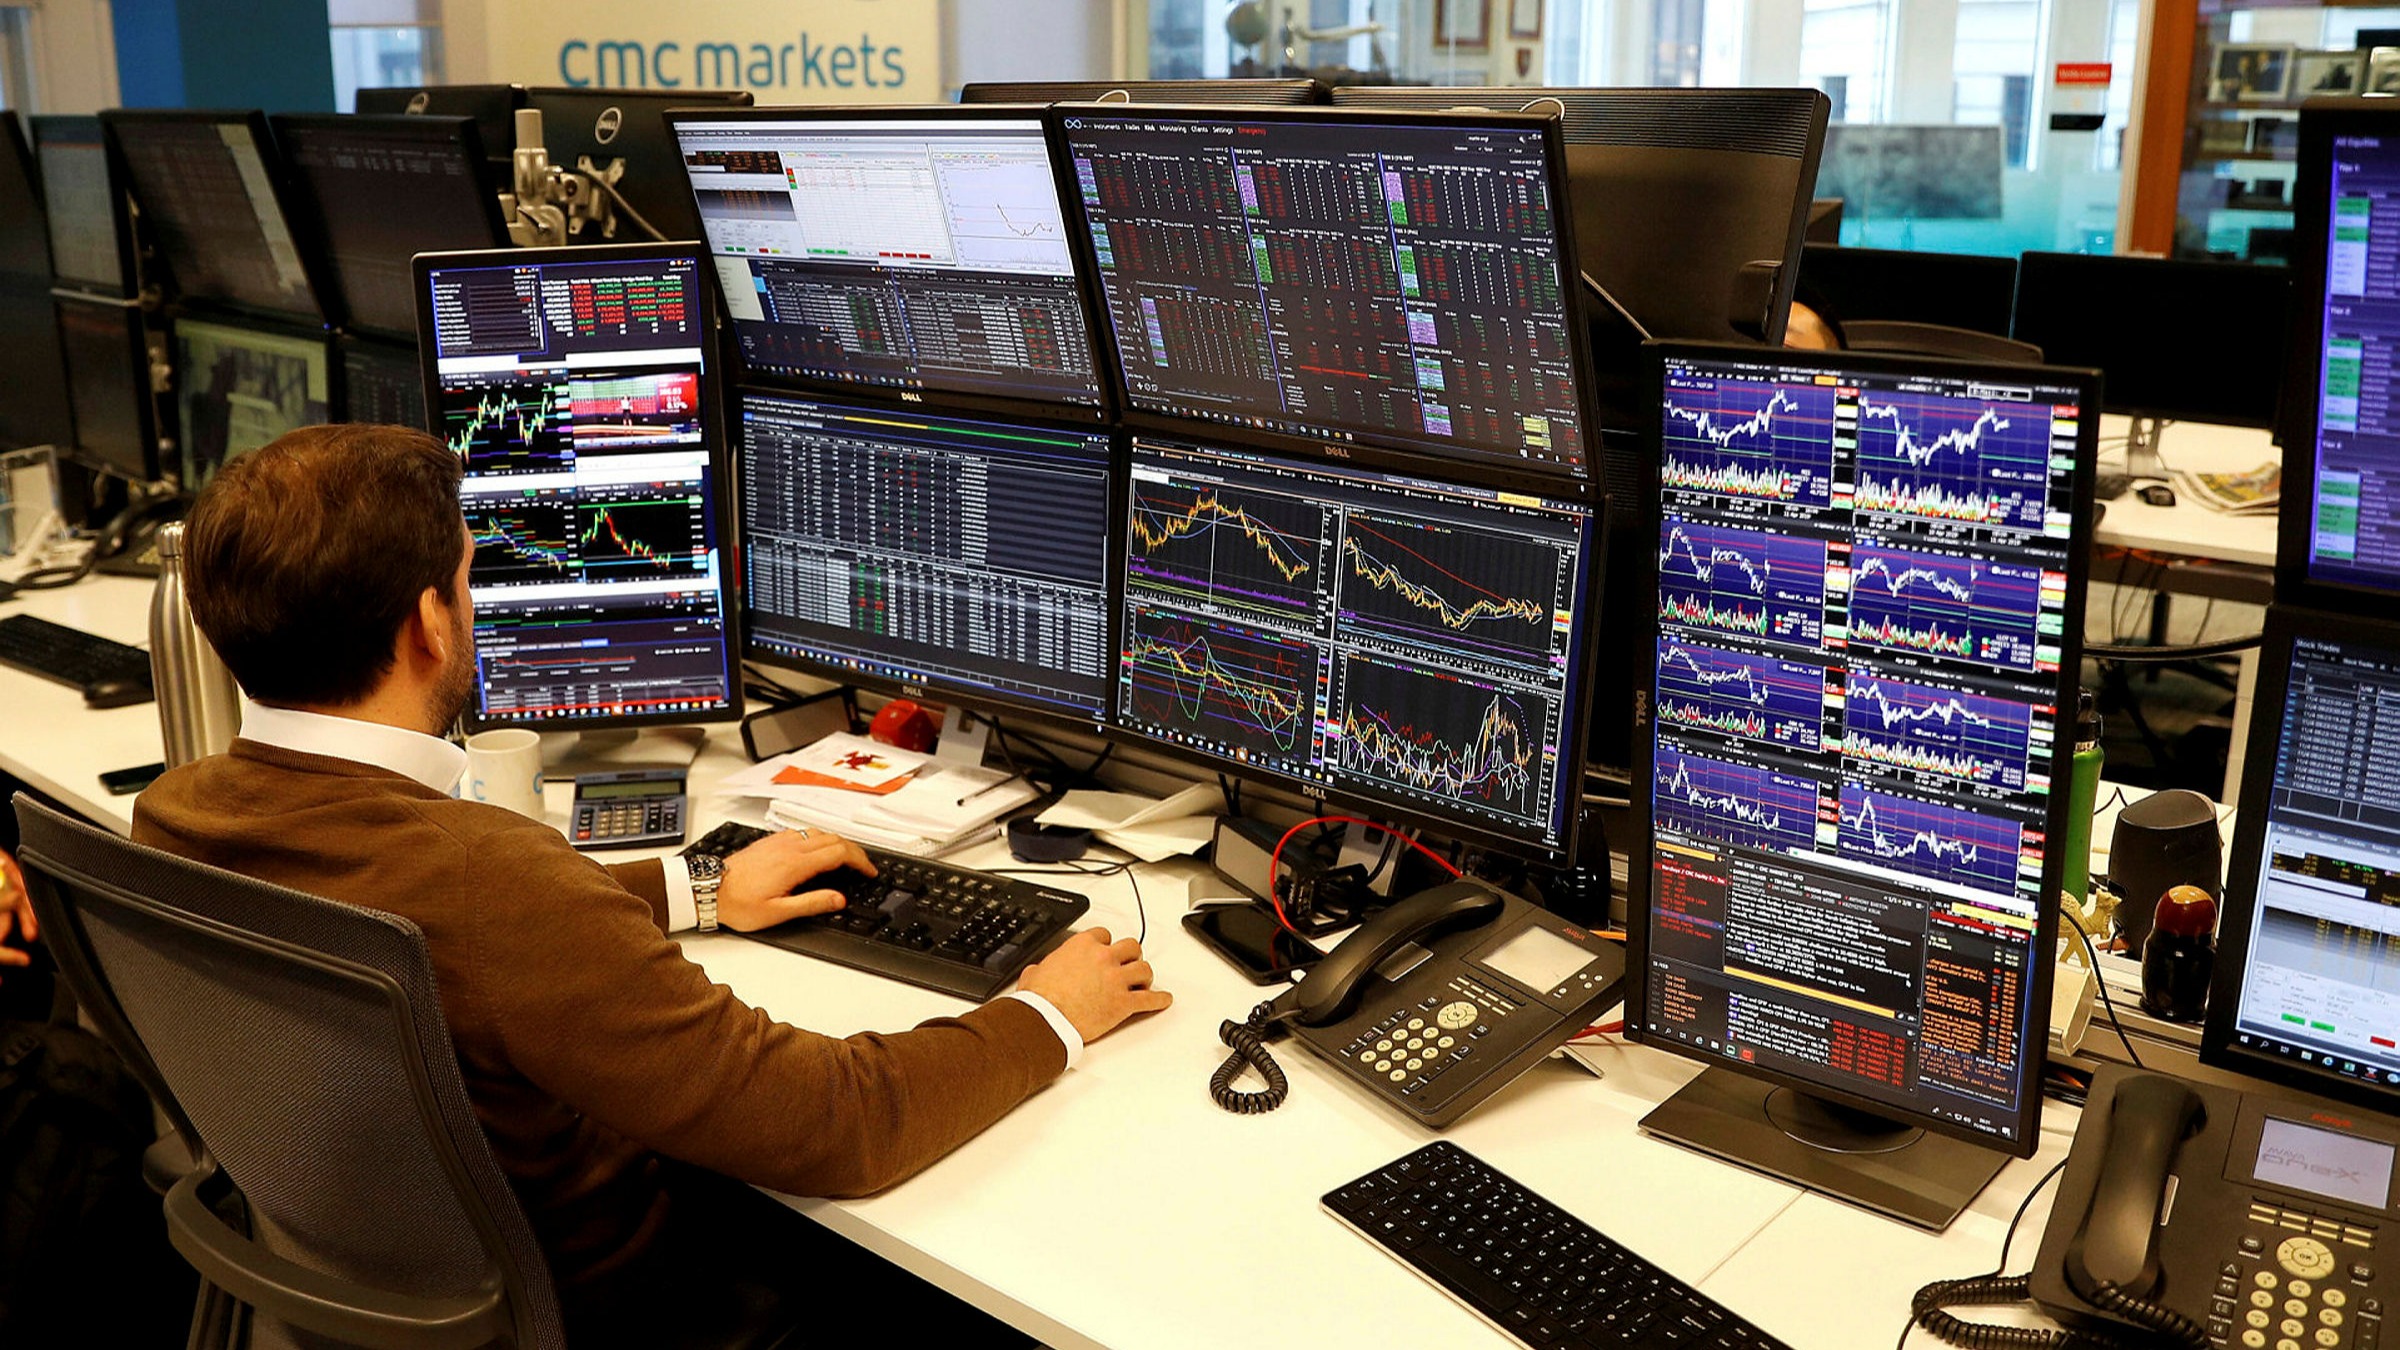 Cmc Markets Shares Plunge After Trading Lull Prompts Profit Warning Financial Times